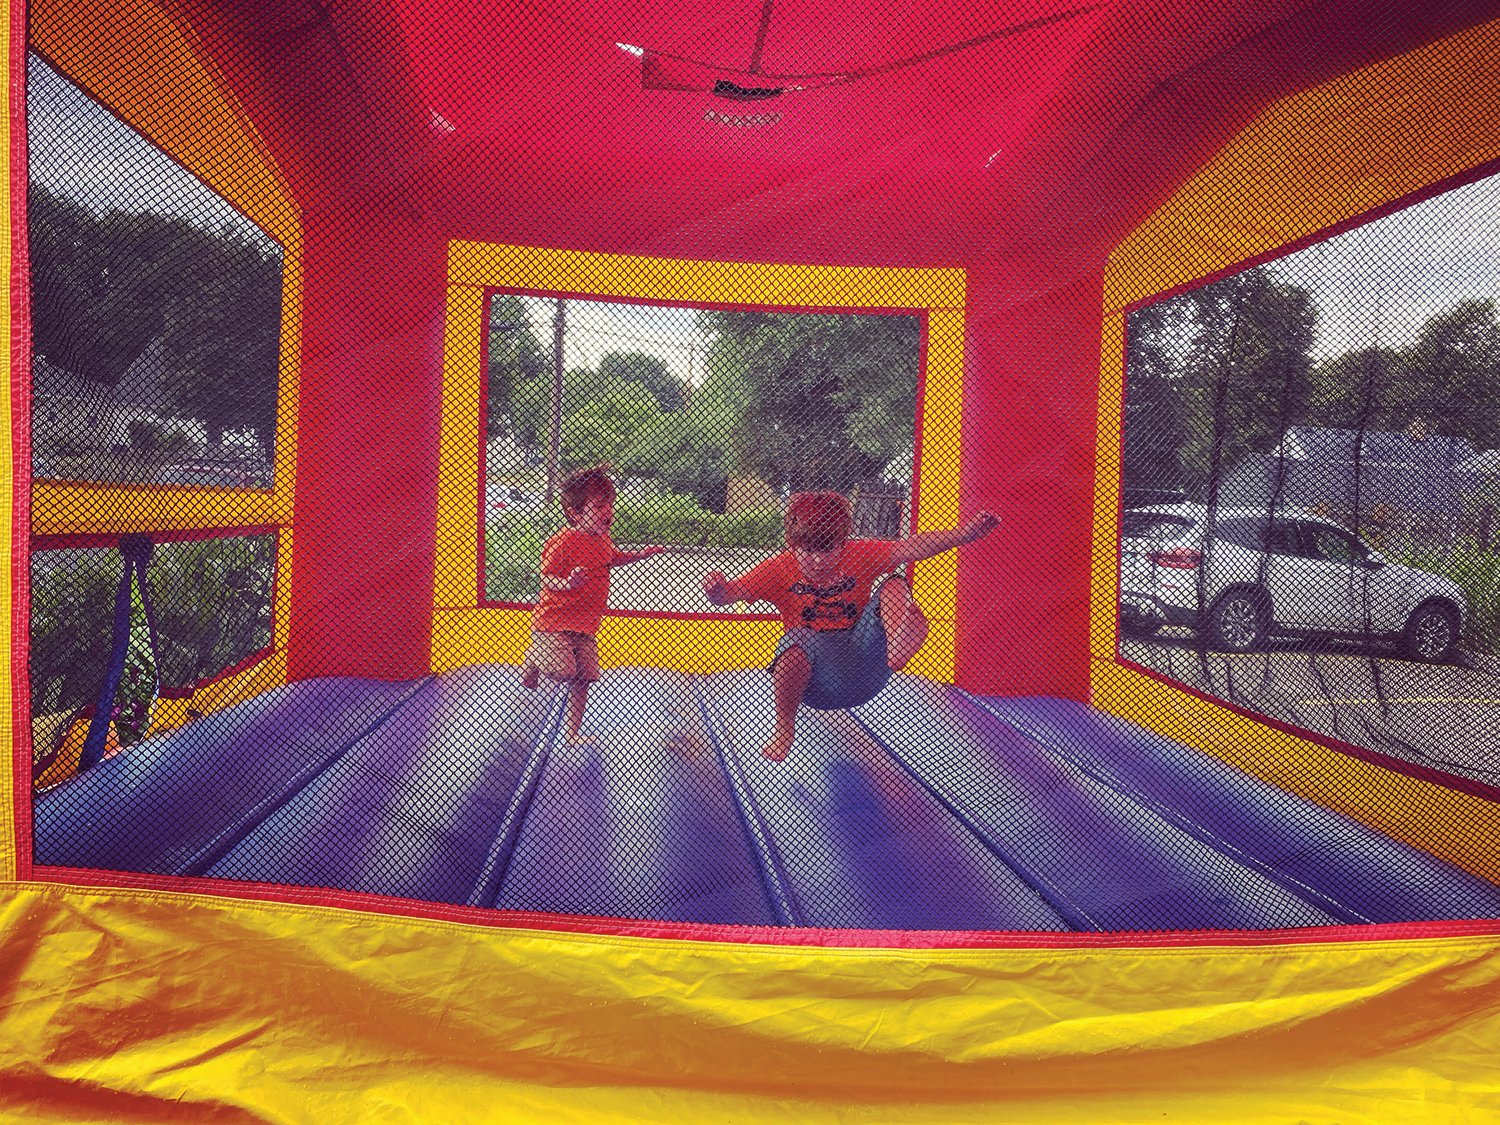 Harrison Bittner (left) enjoys the bounce house at GrandeSunrise with his brother, Aiden, 8, on his fourth birthday.